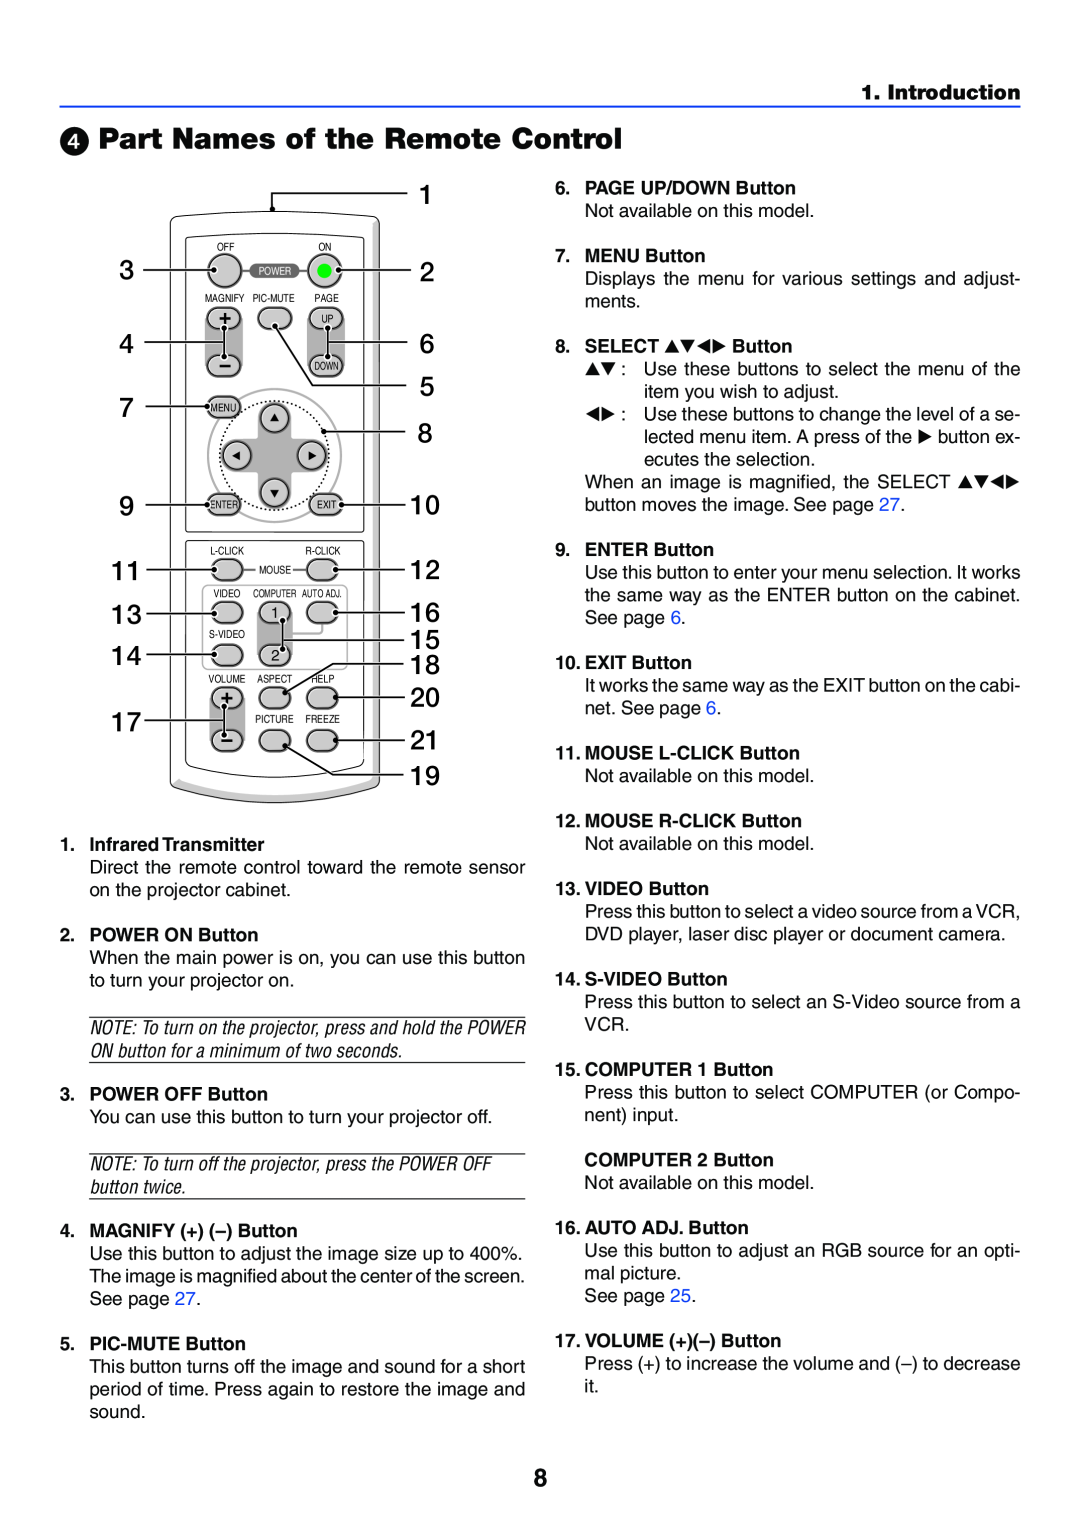 NEC VT37 manual Part Names of the Remote Control, Introduction 